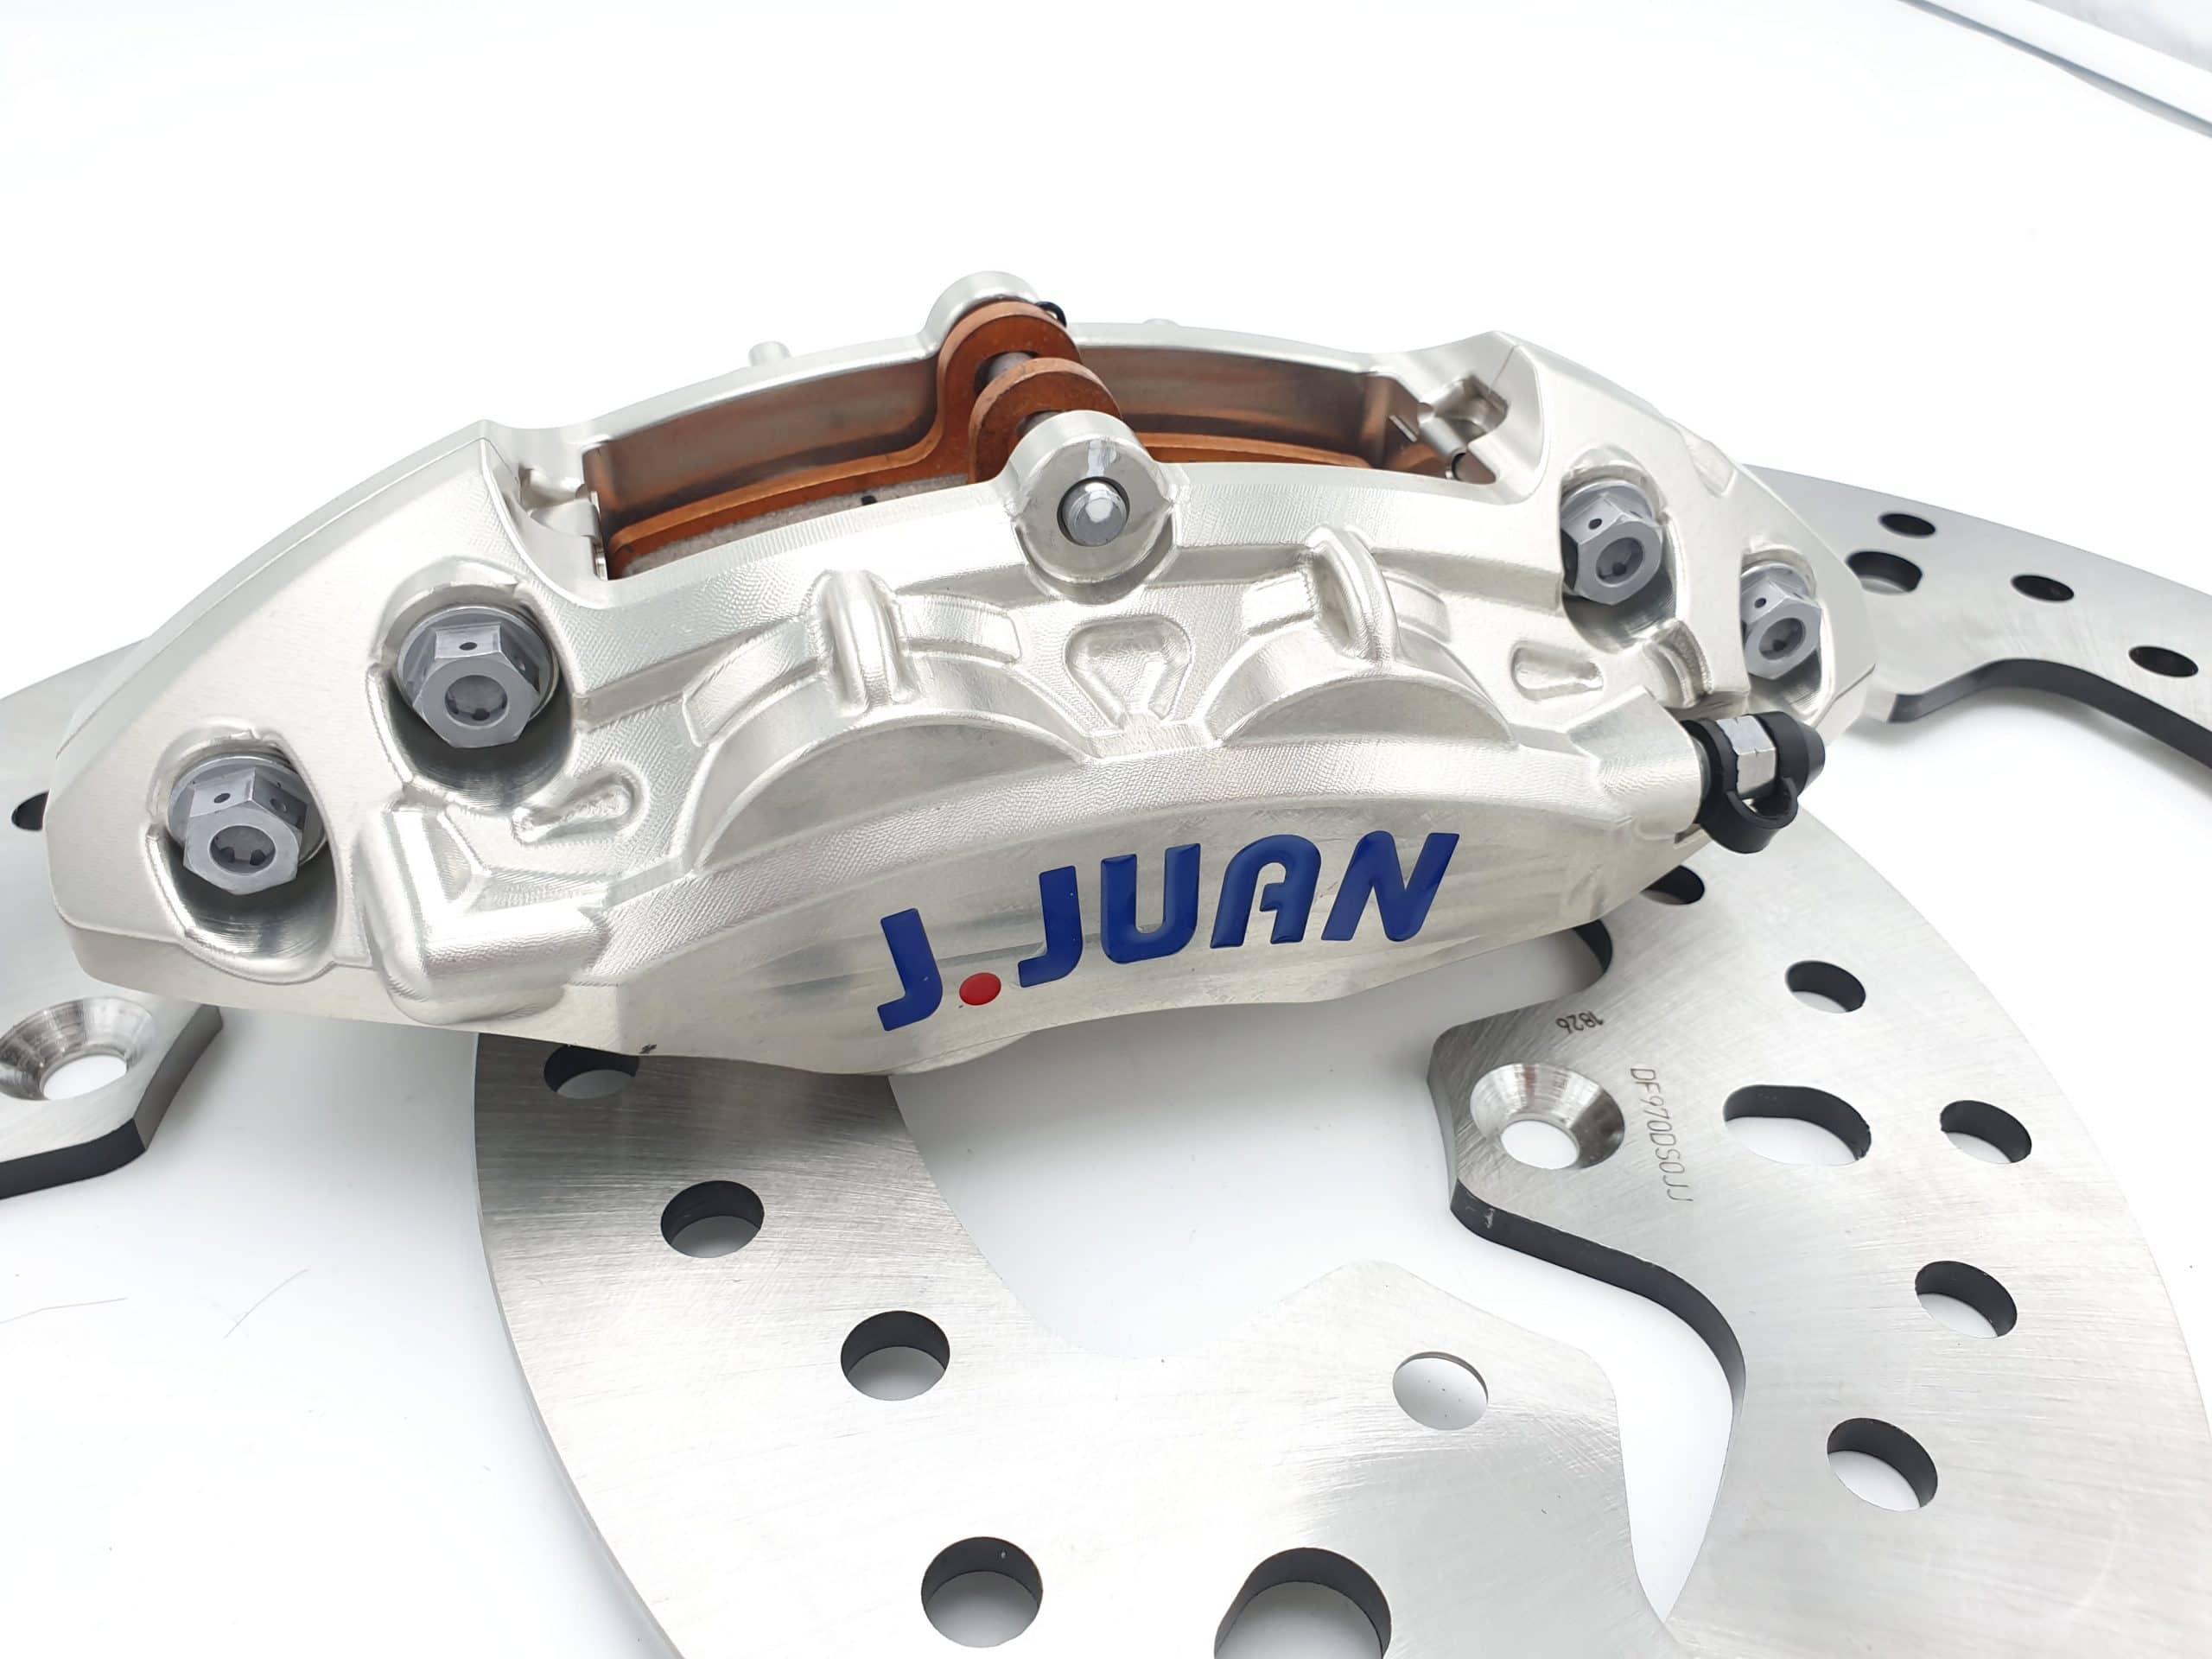 Brembo Completes Acquisition of J.Juan